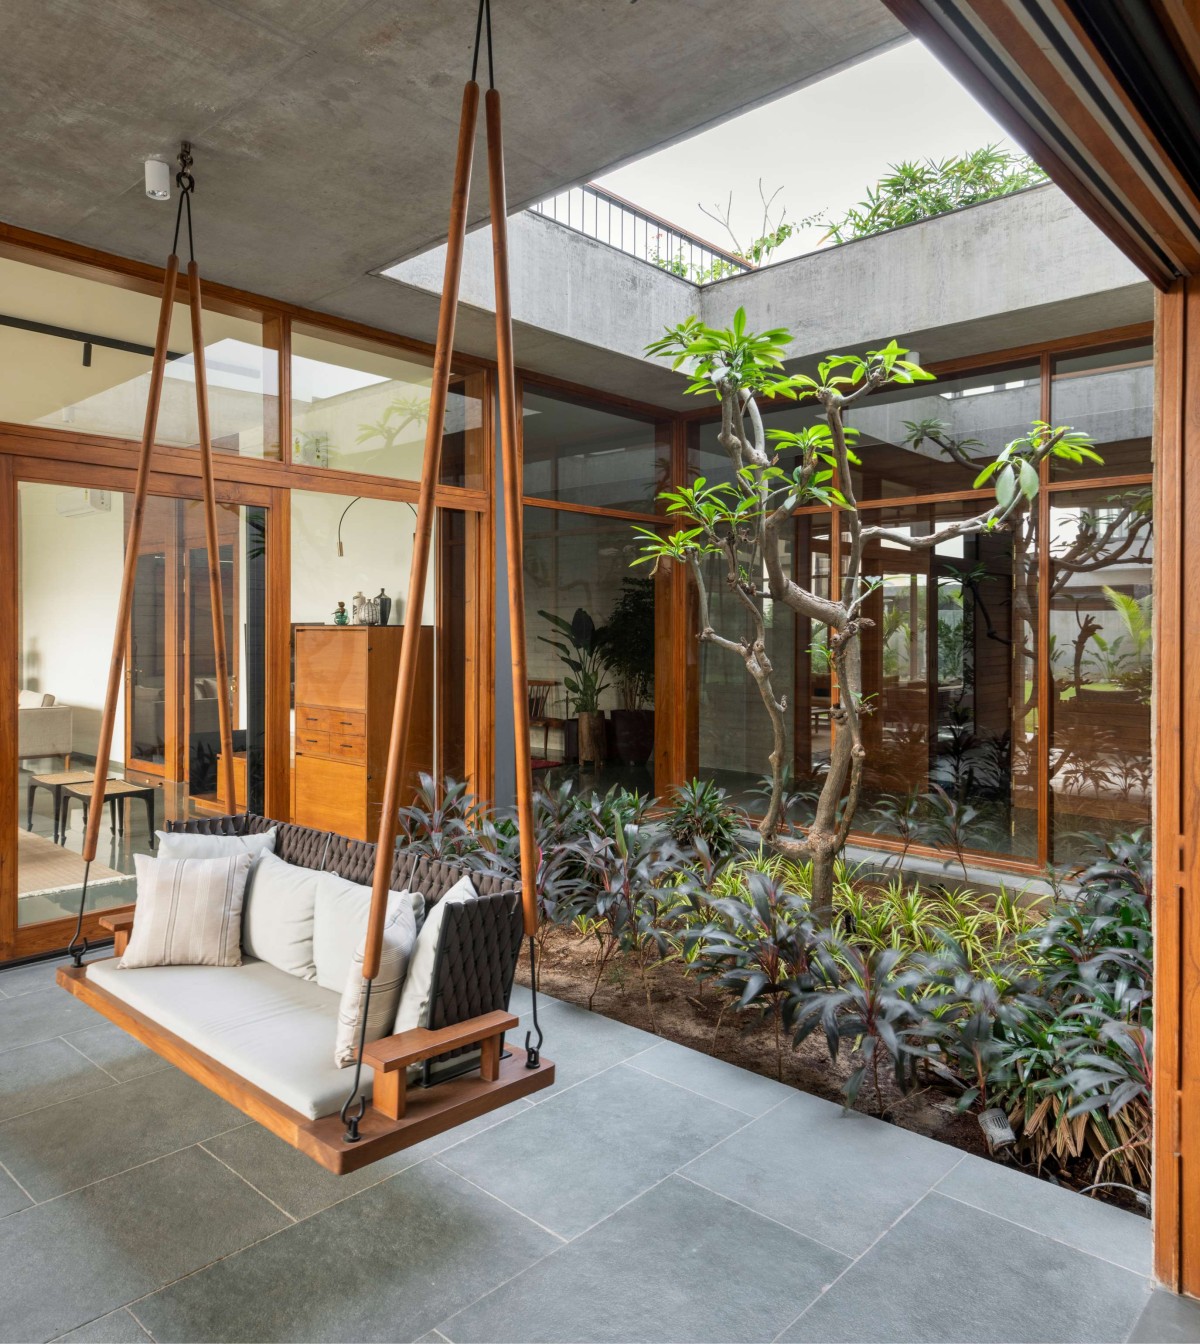 Courtyard of Hovering House of Parikhs by Anarr Gunjaria Interiors and Modo Design 0